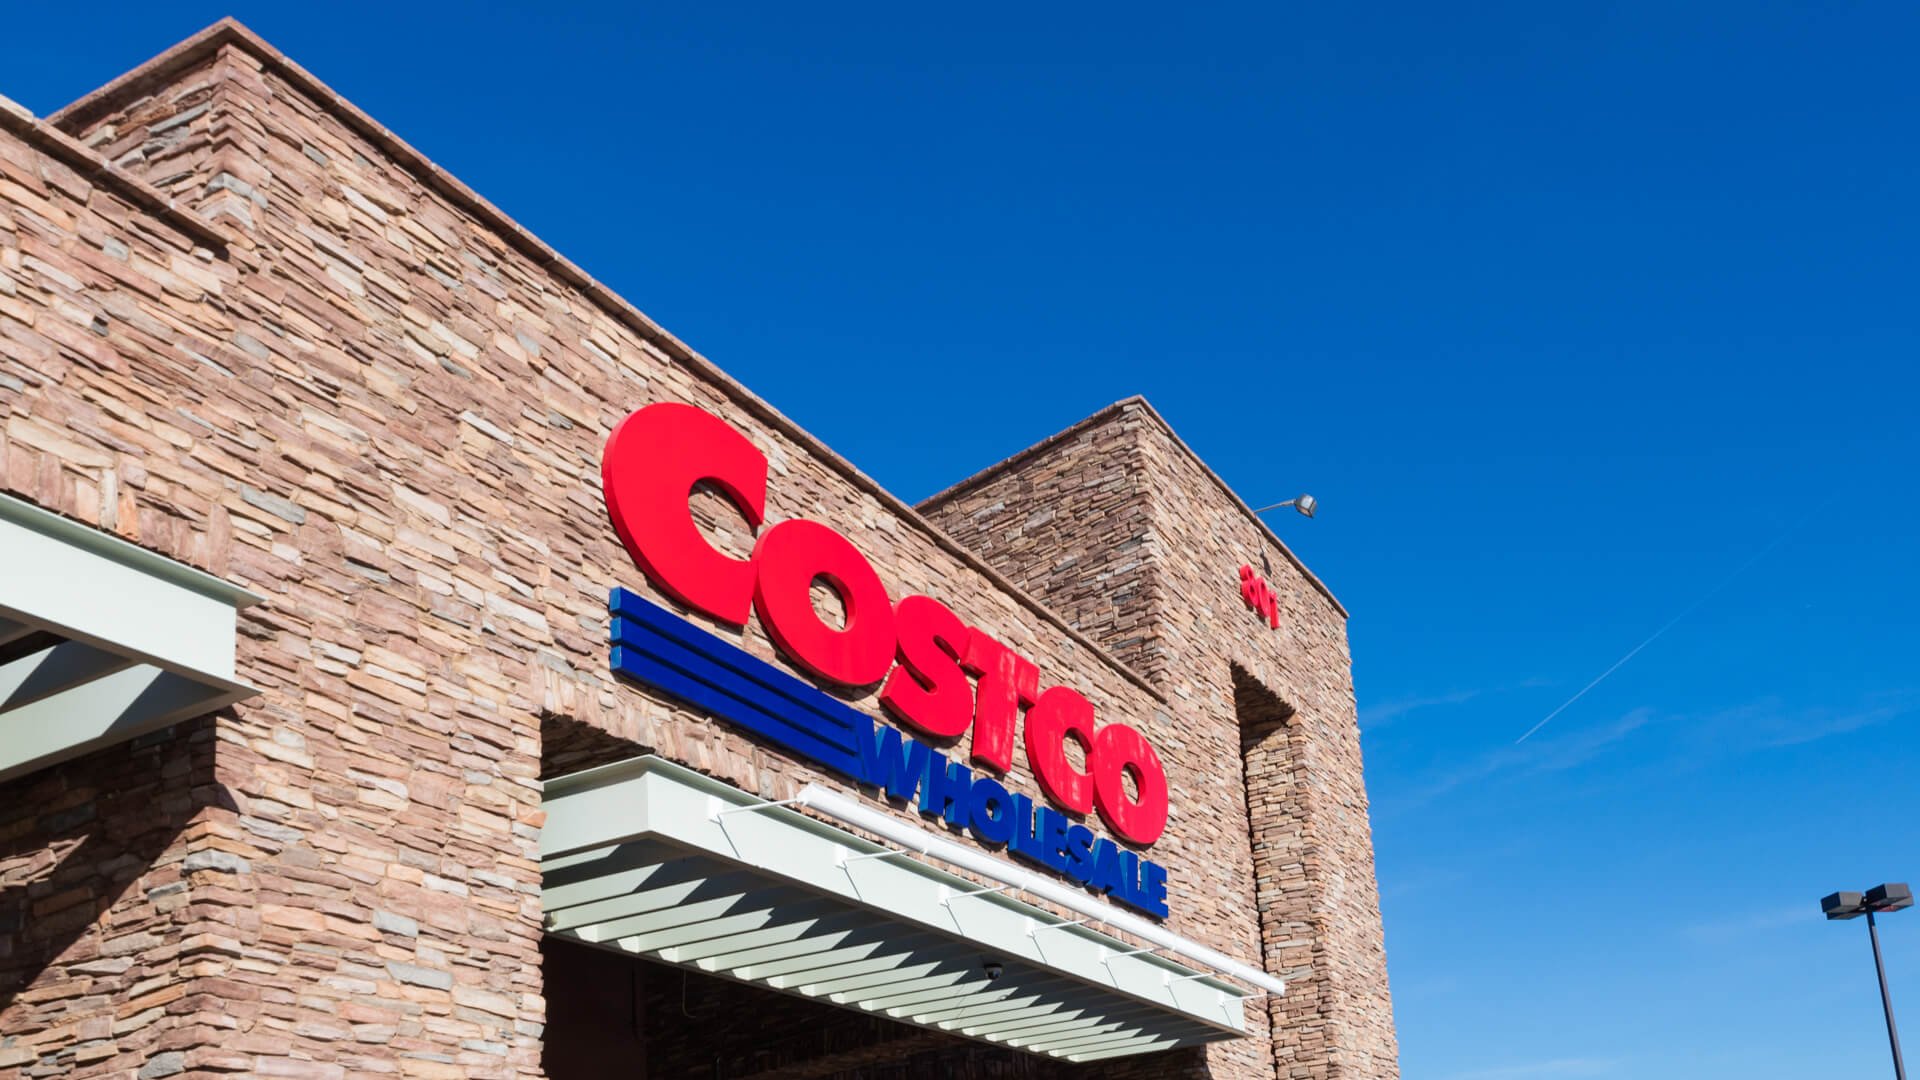 10 Costco Brand Items To Buy That Are Just as Good as Name Brands